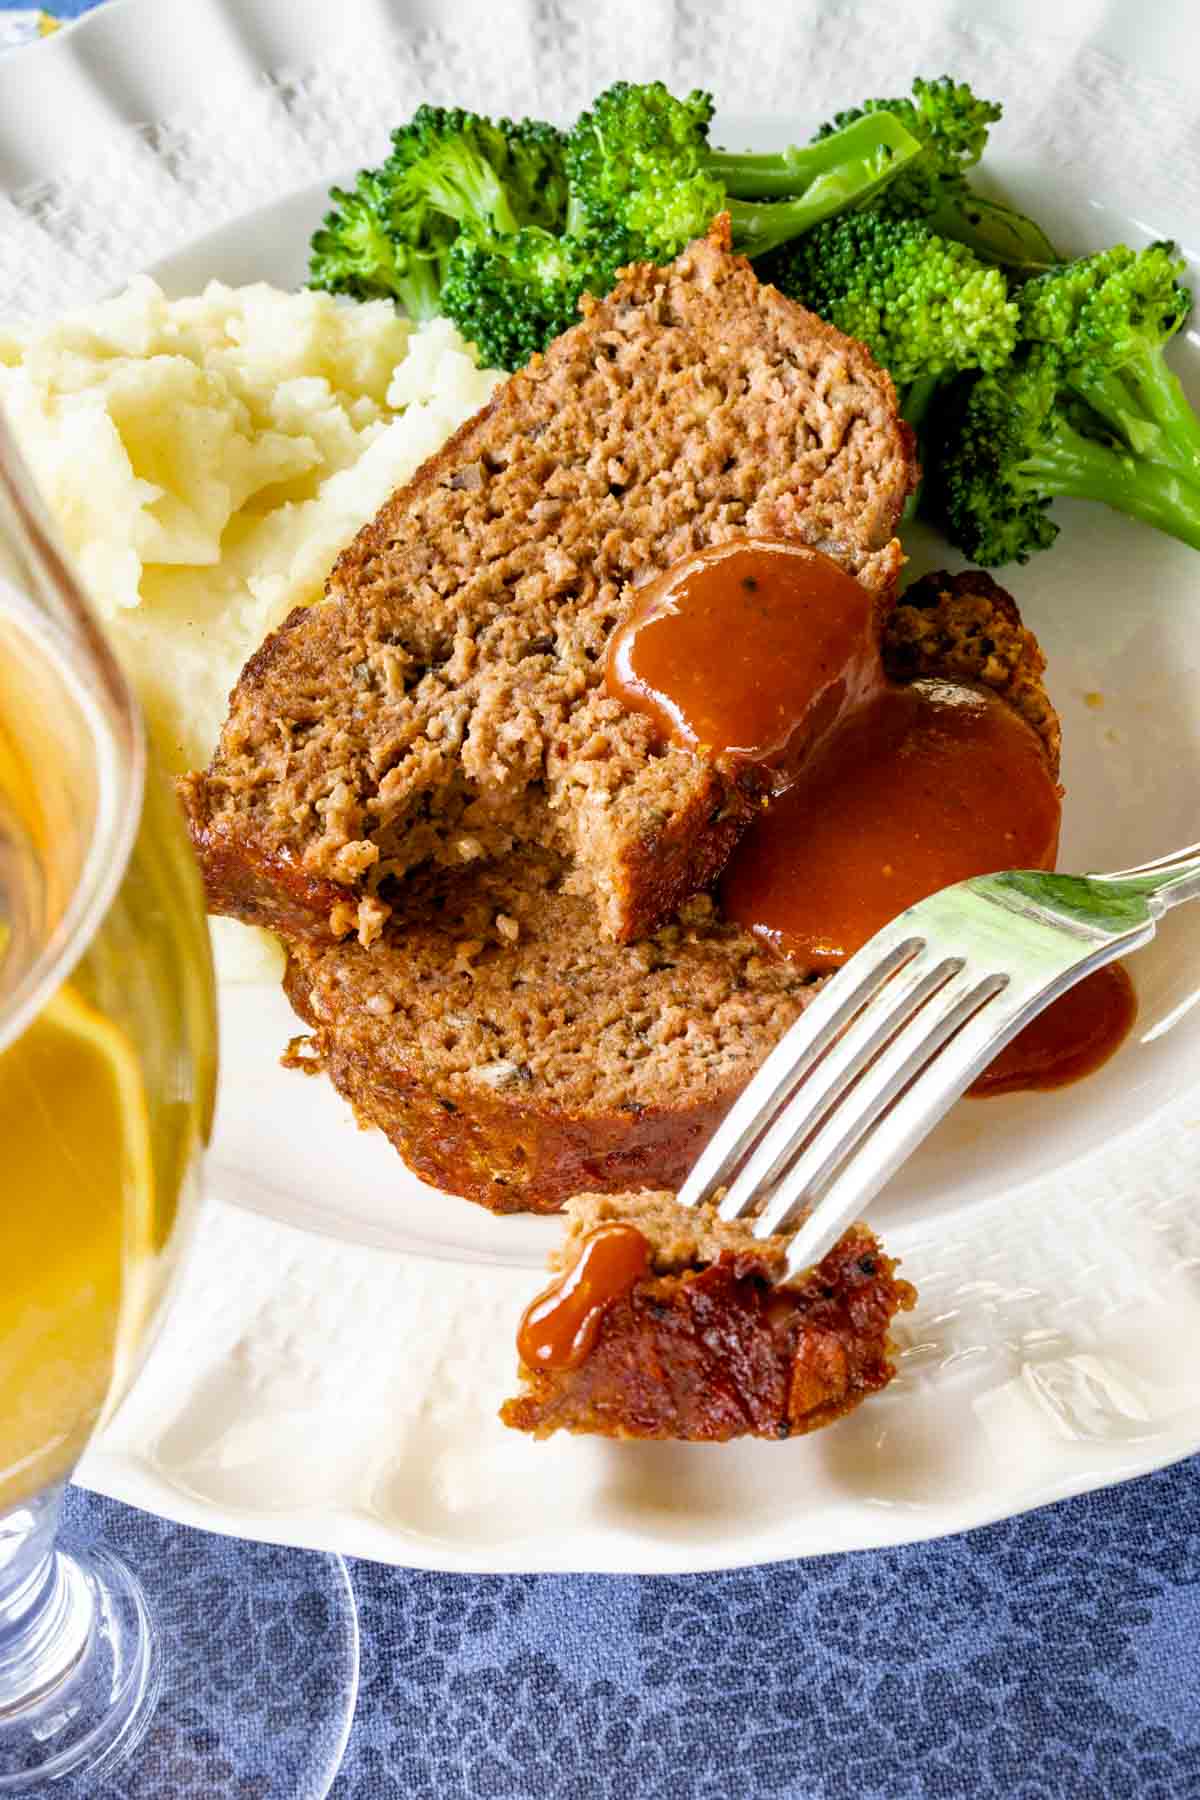 two slices of barbecued beef meatloaf with barbecue sauce on them, with mashed potatoes and broccoli